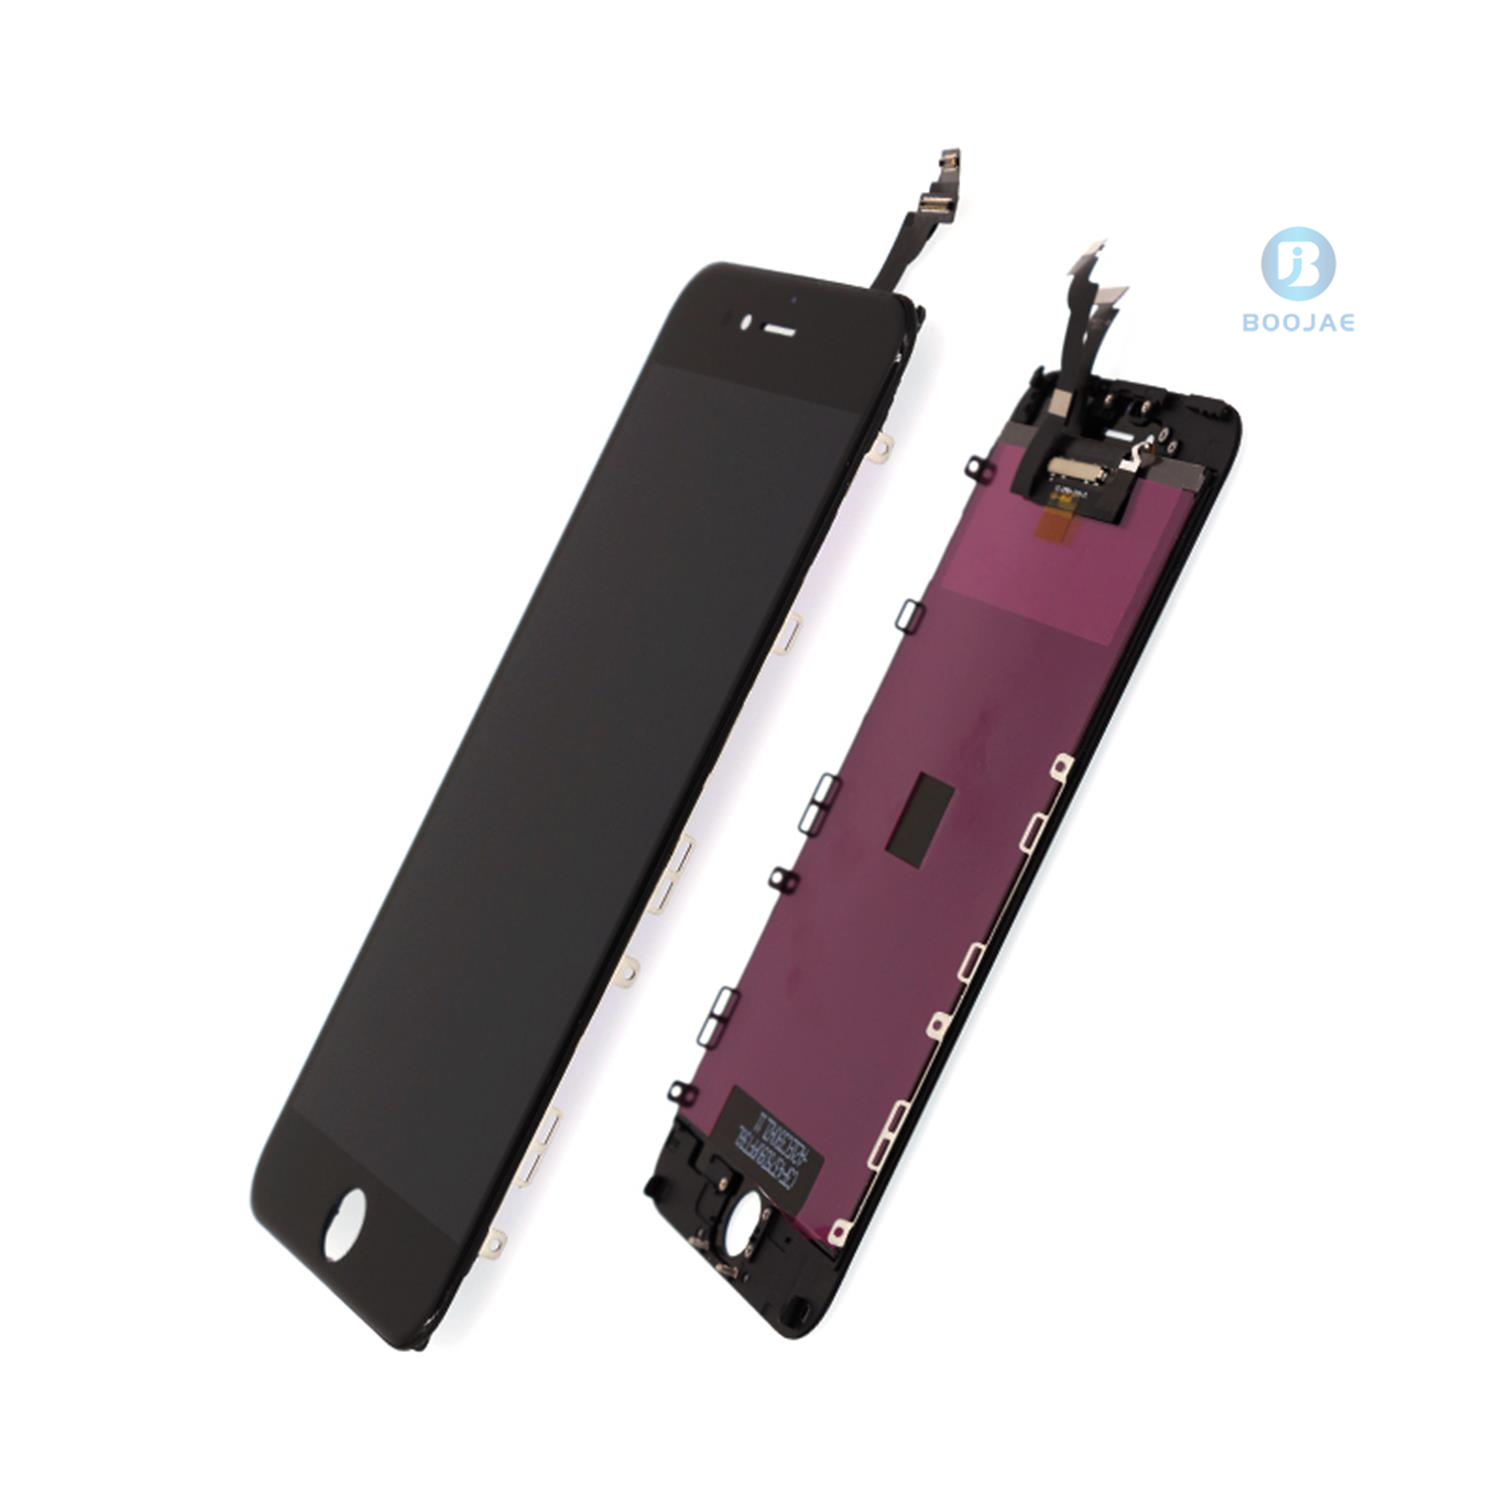 iPhone 6 Plus LCD Screen Display and Touch Panel Digitizer Assembly Replacement